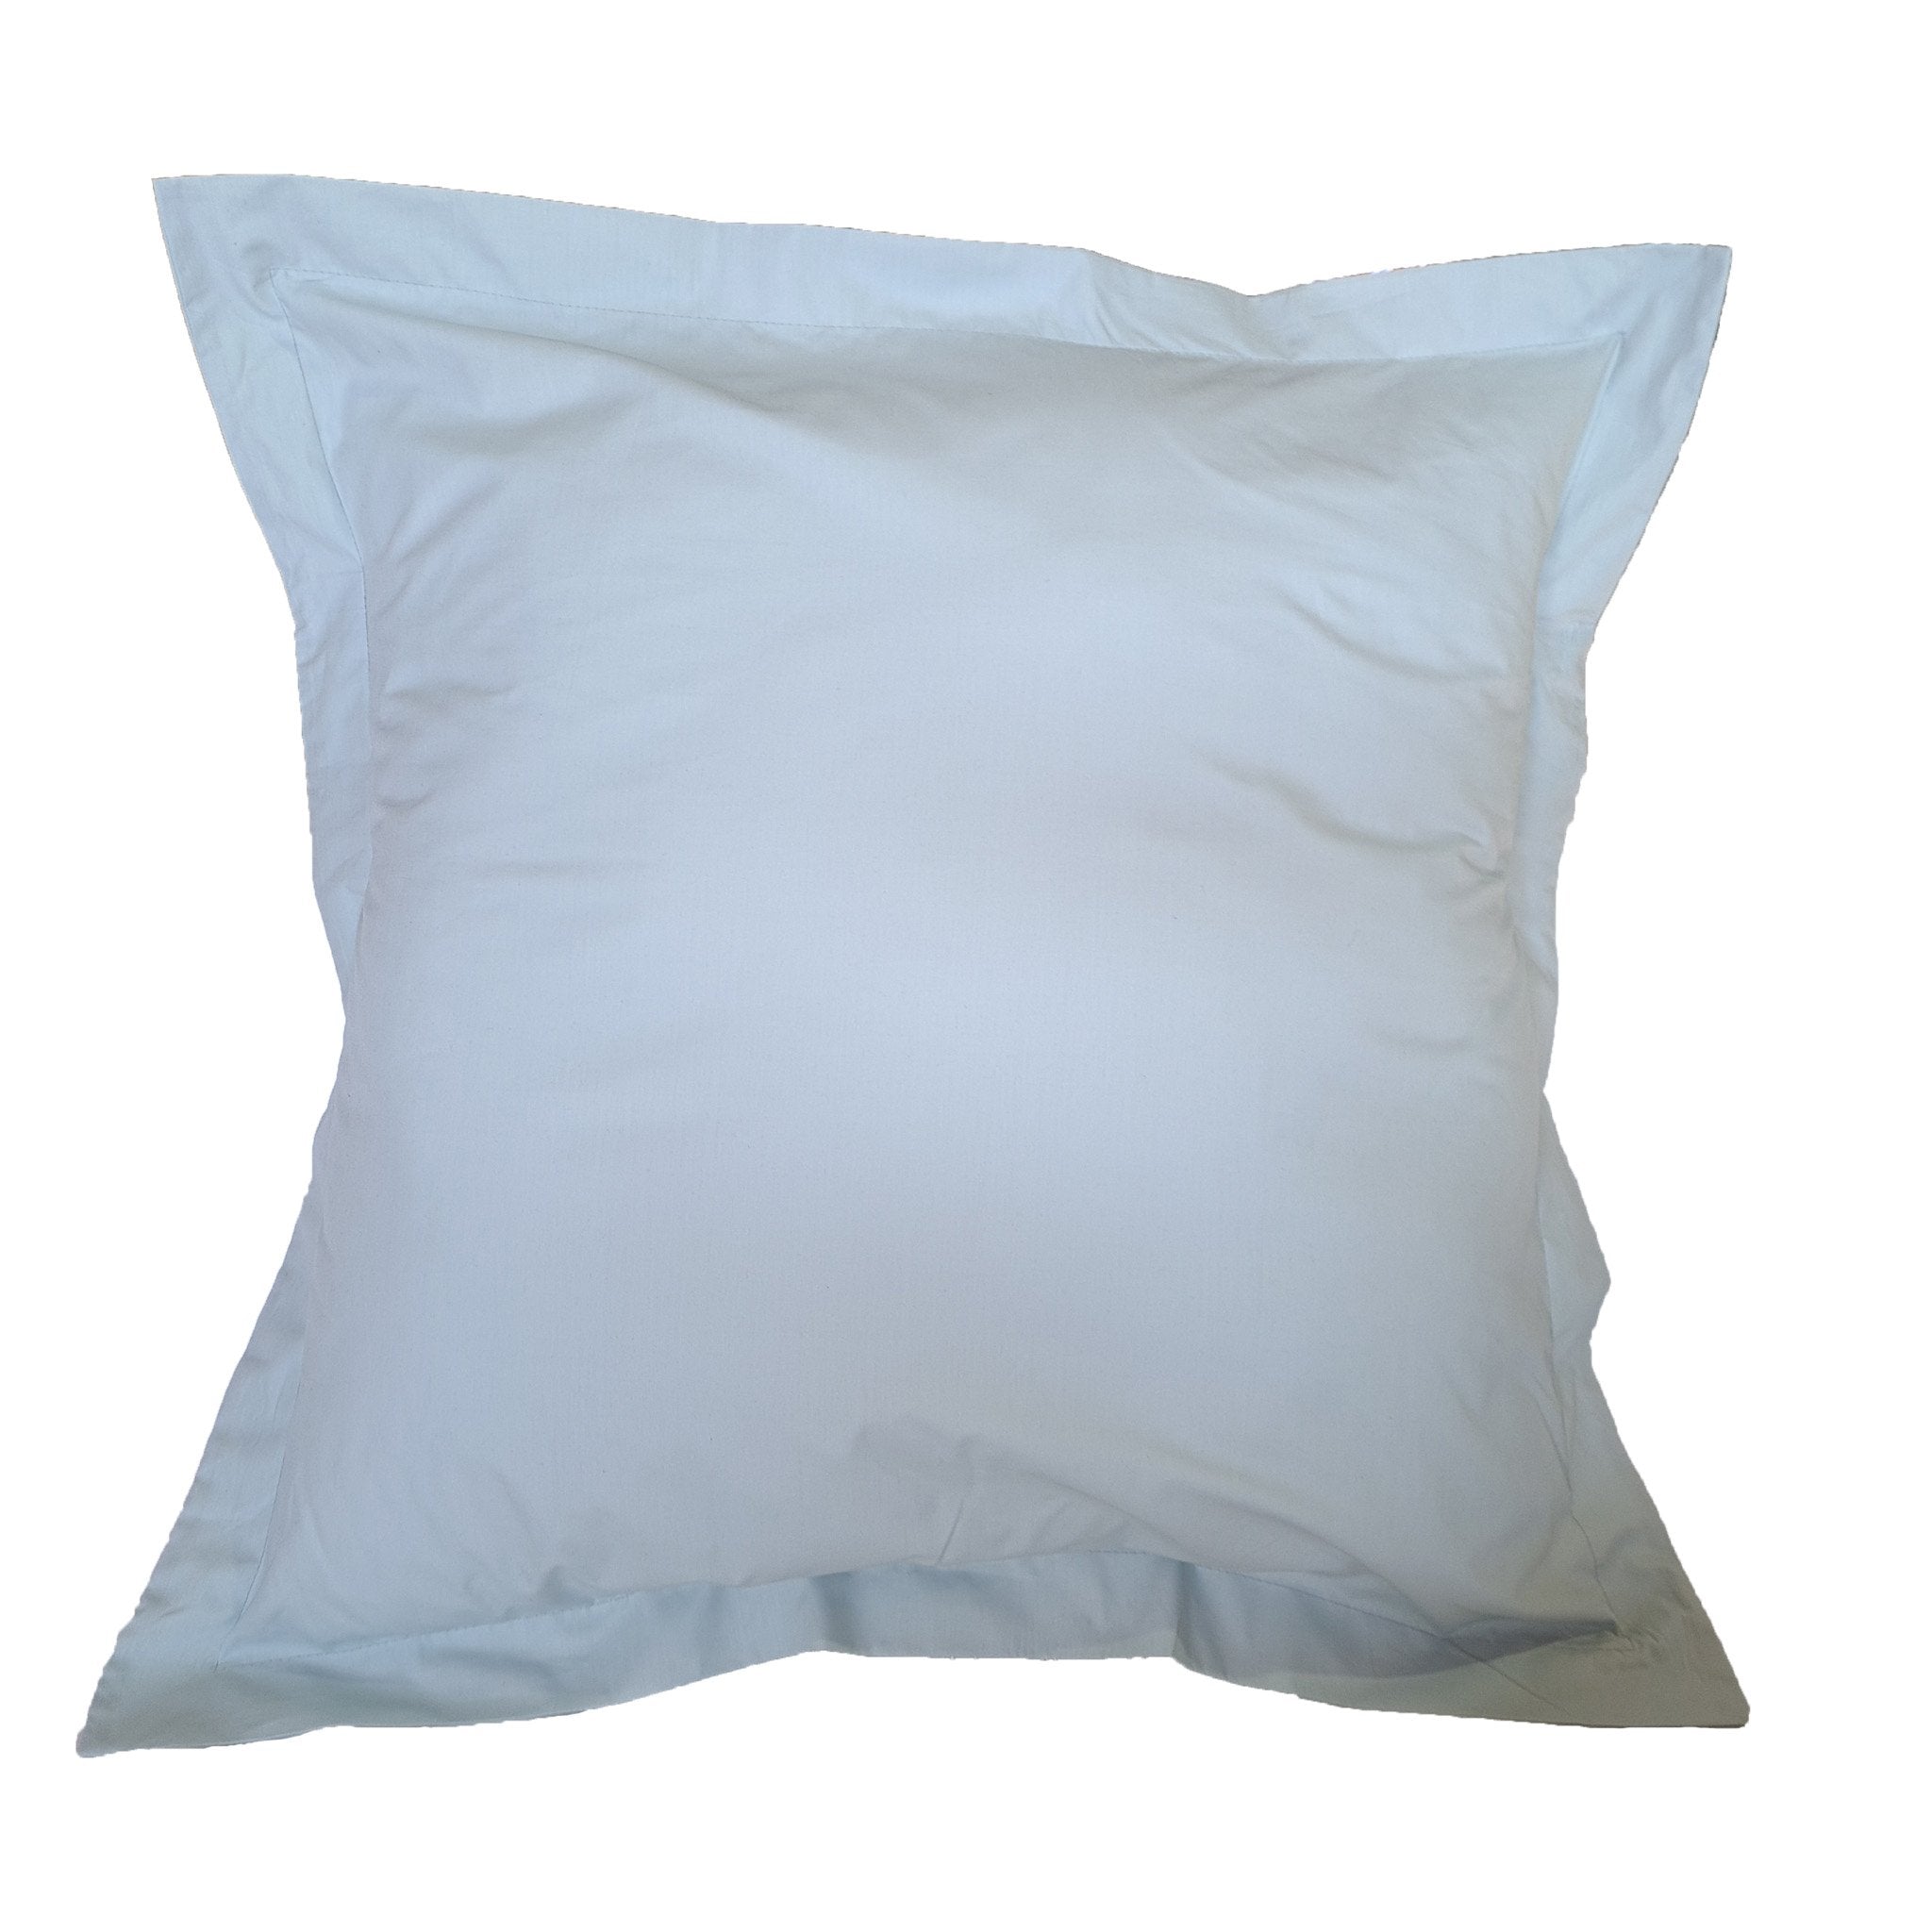 Oxford Continental Pillow Cases - T200 Cotton Percale